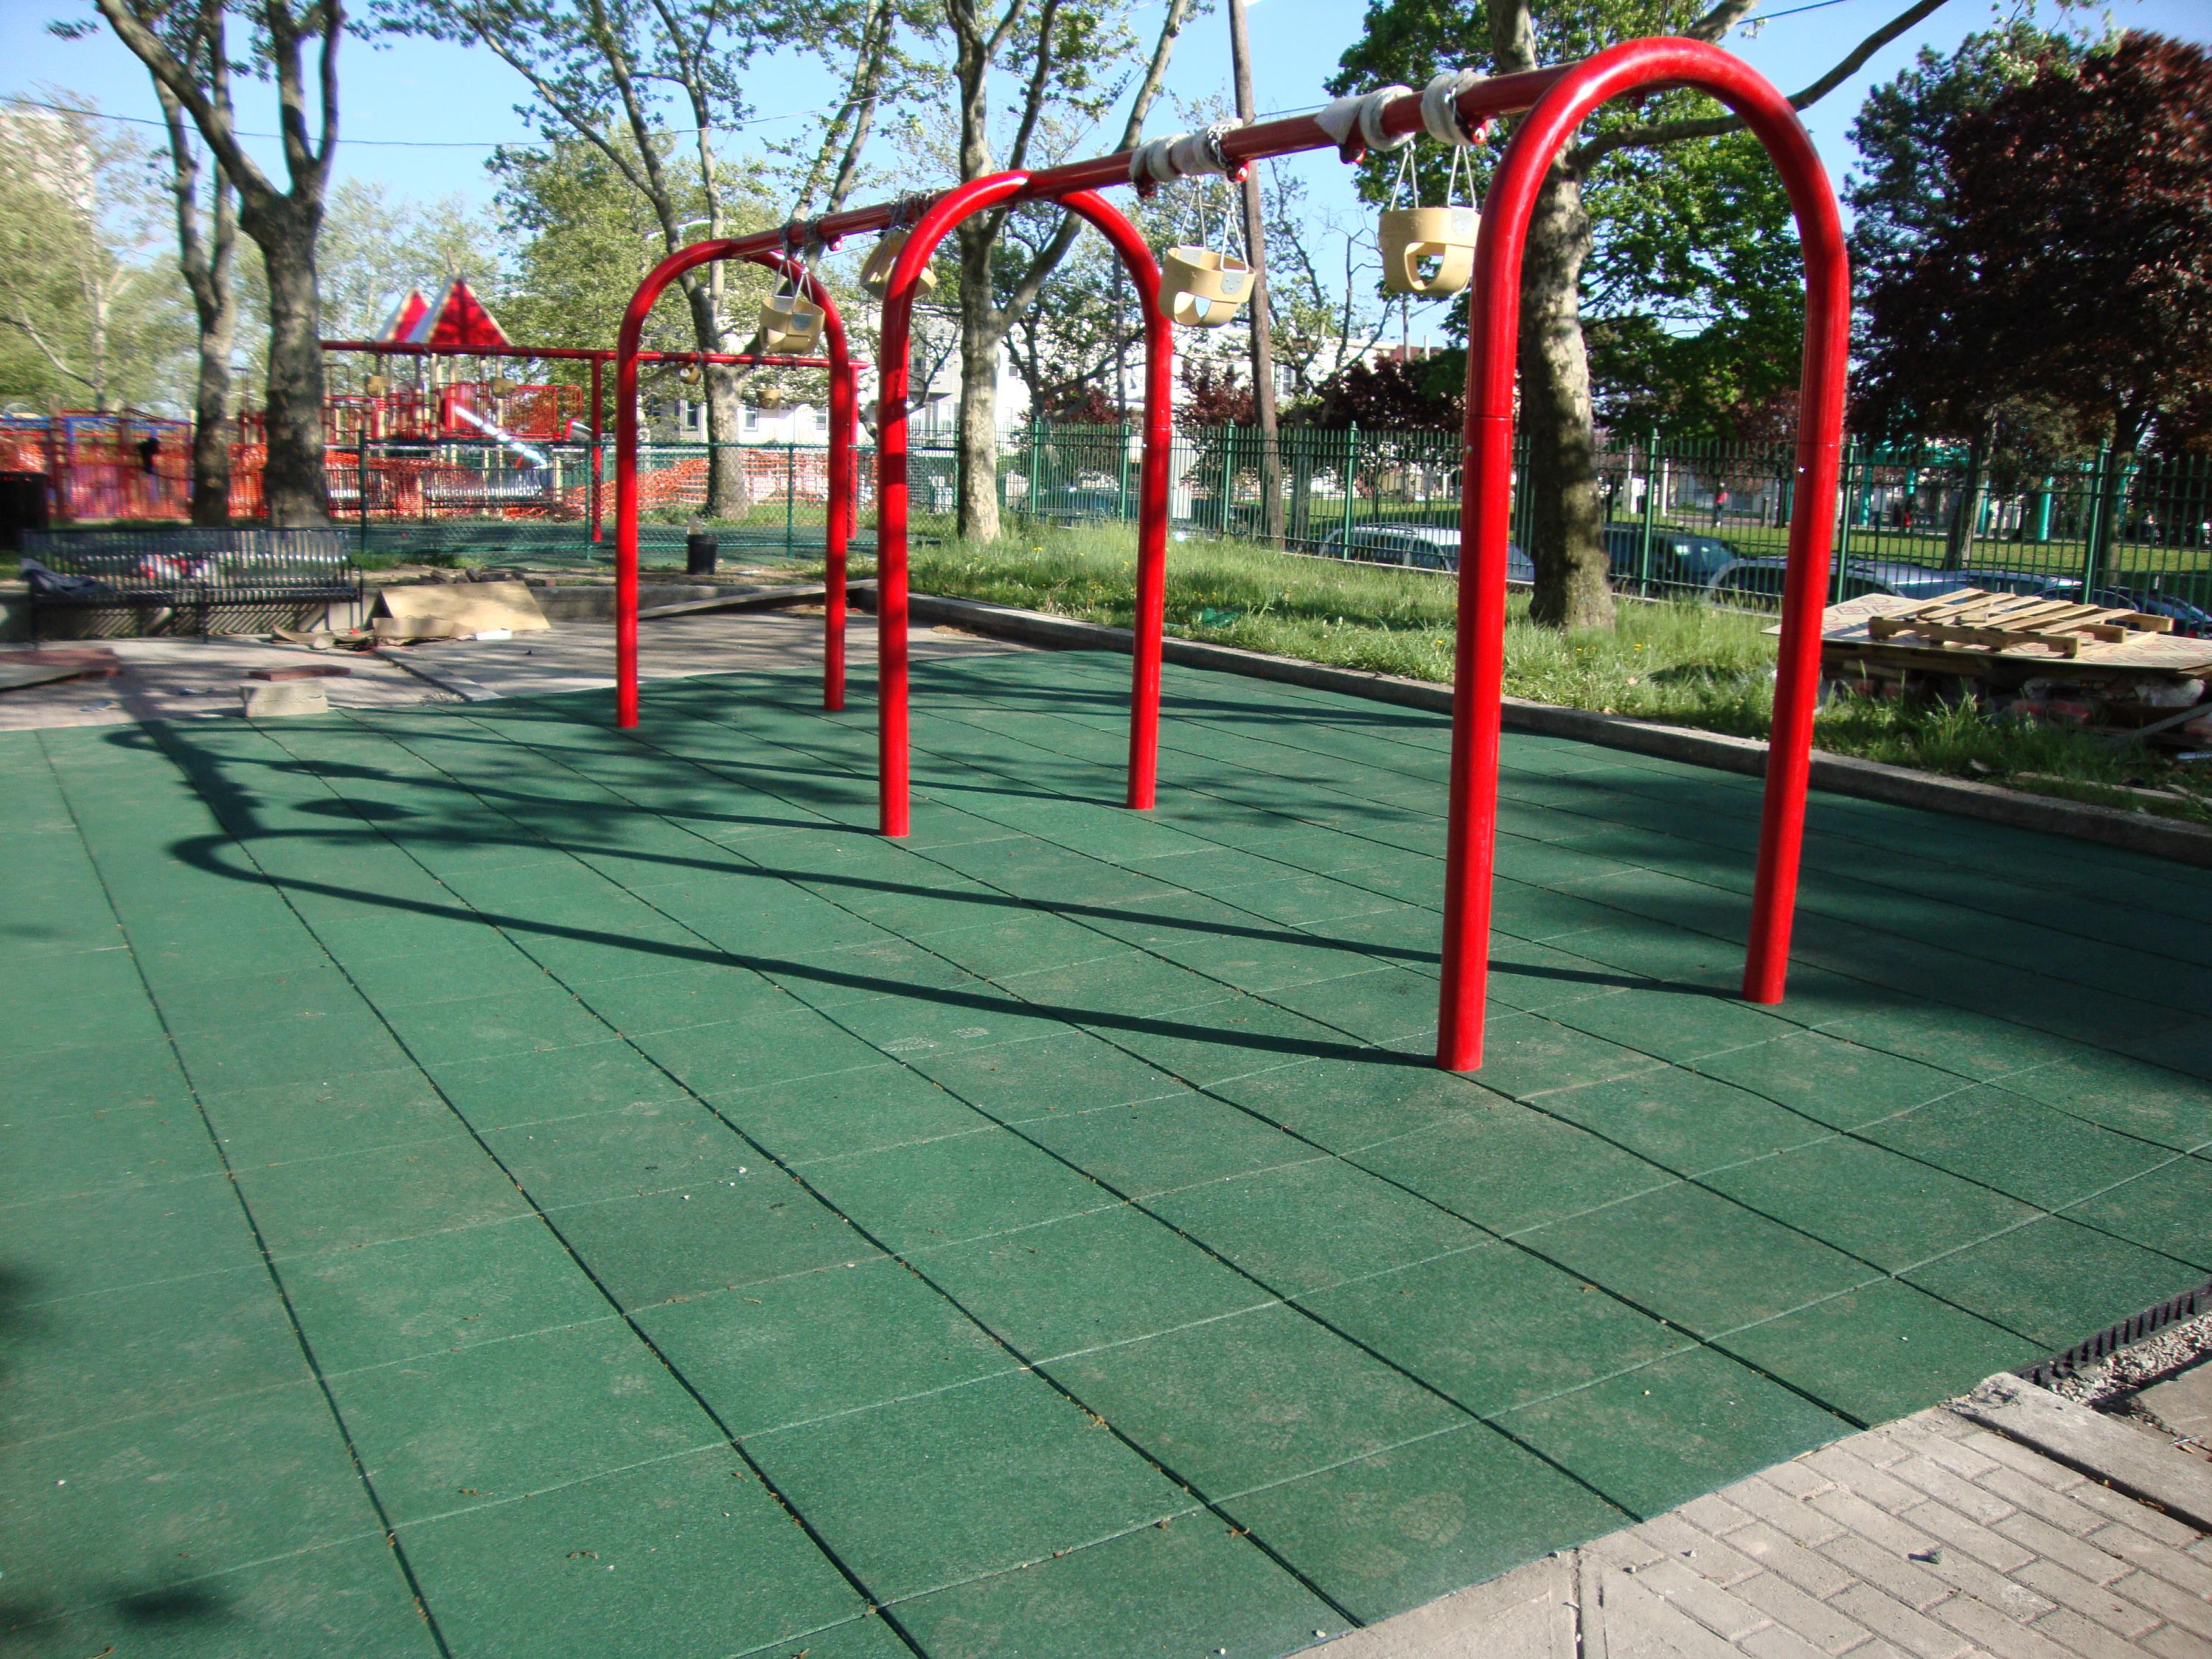 Large Public Park with Multiple Playgrounds Using Designs d